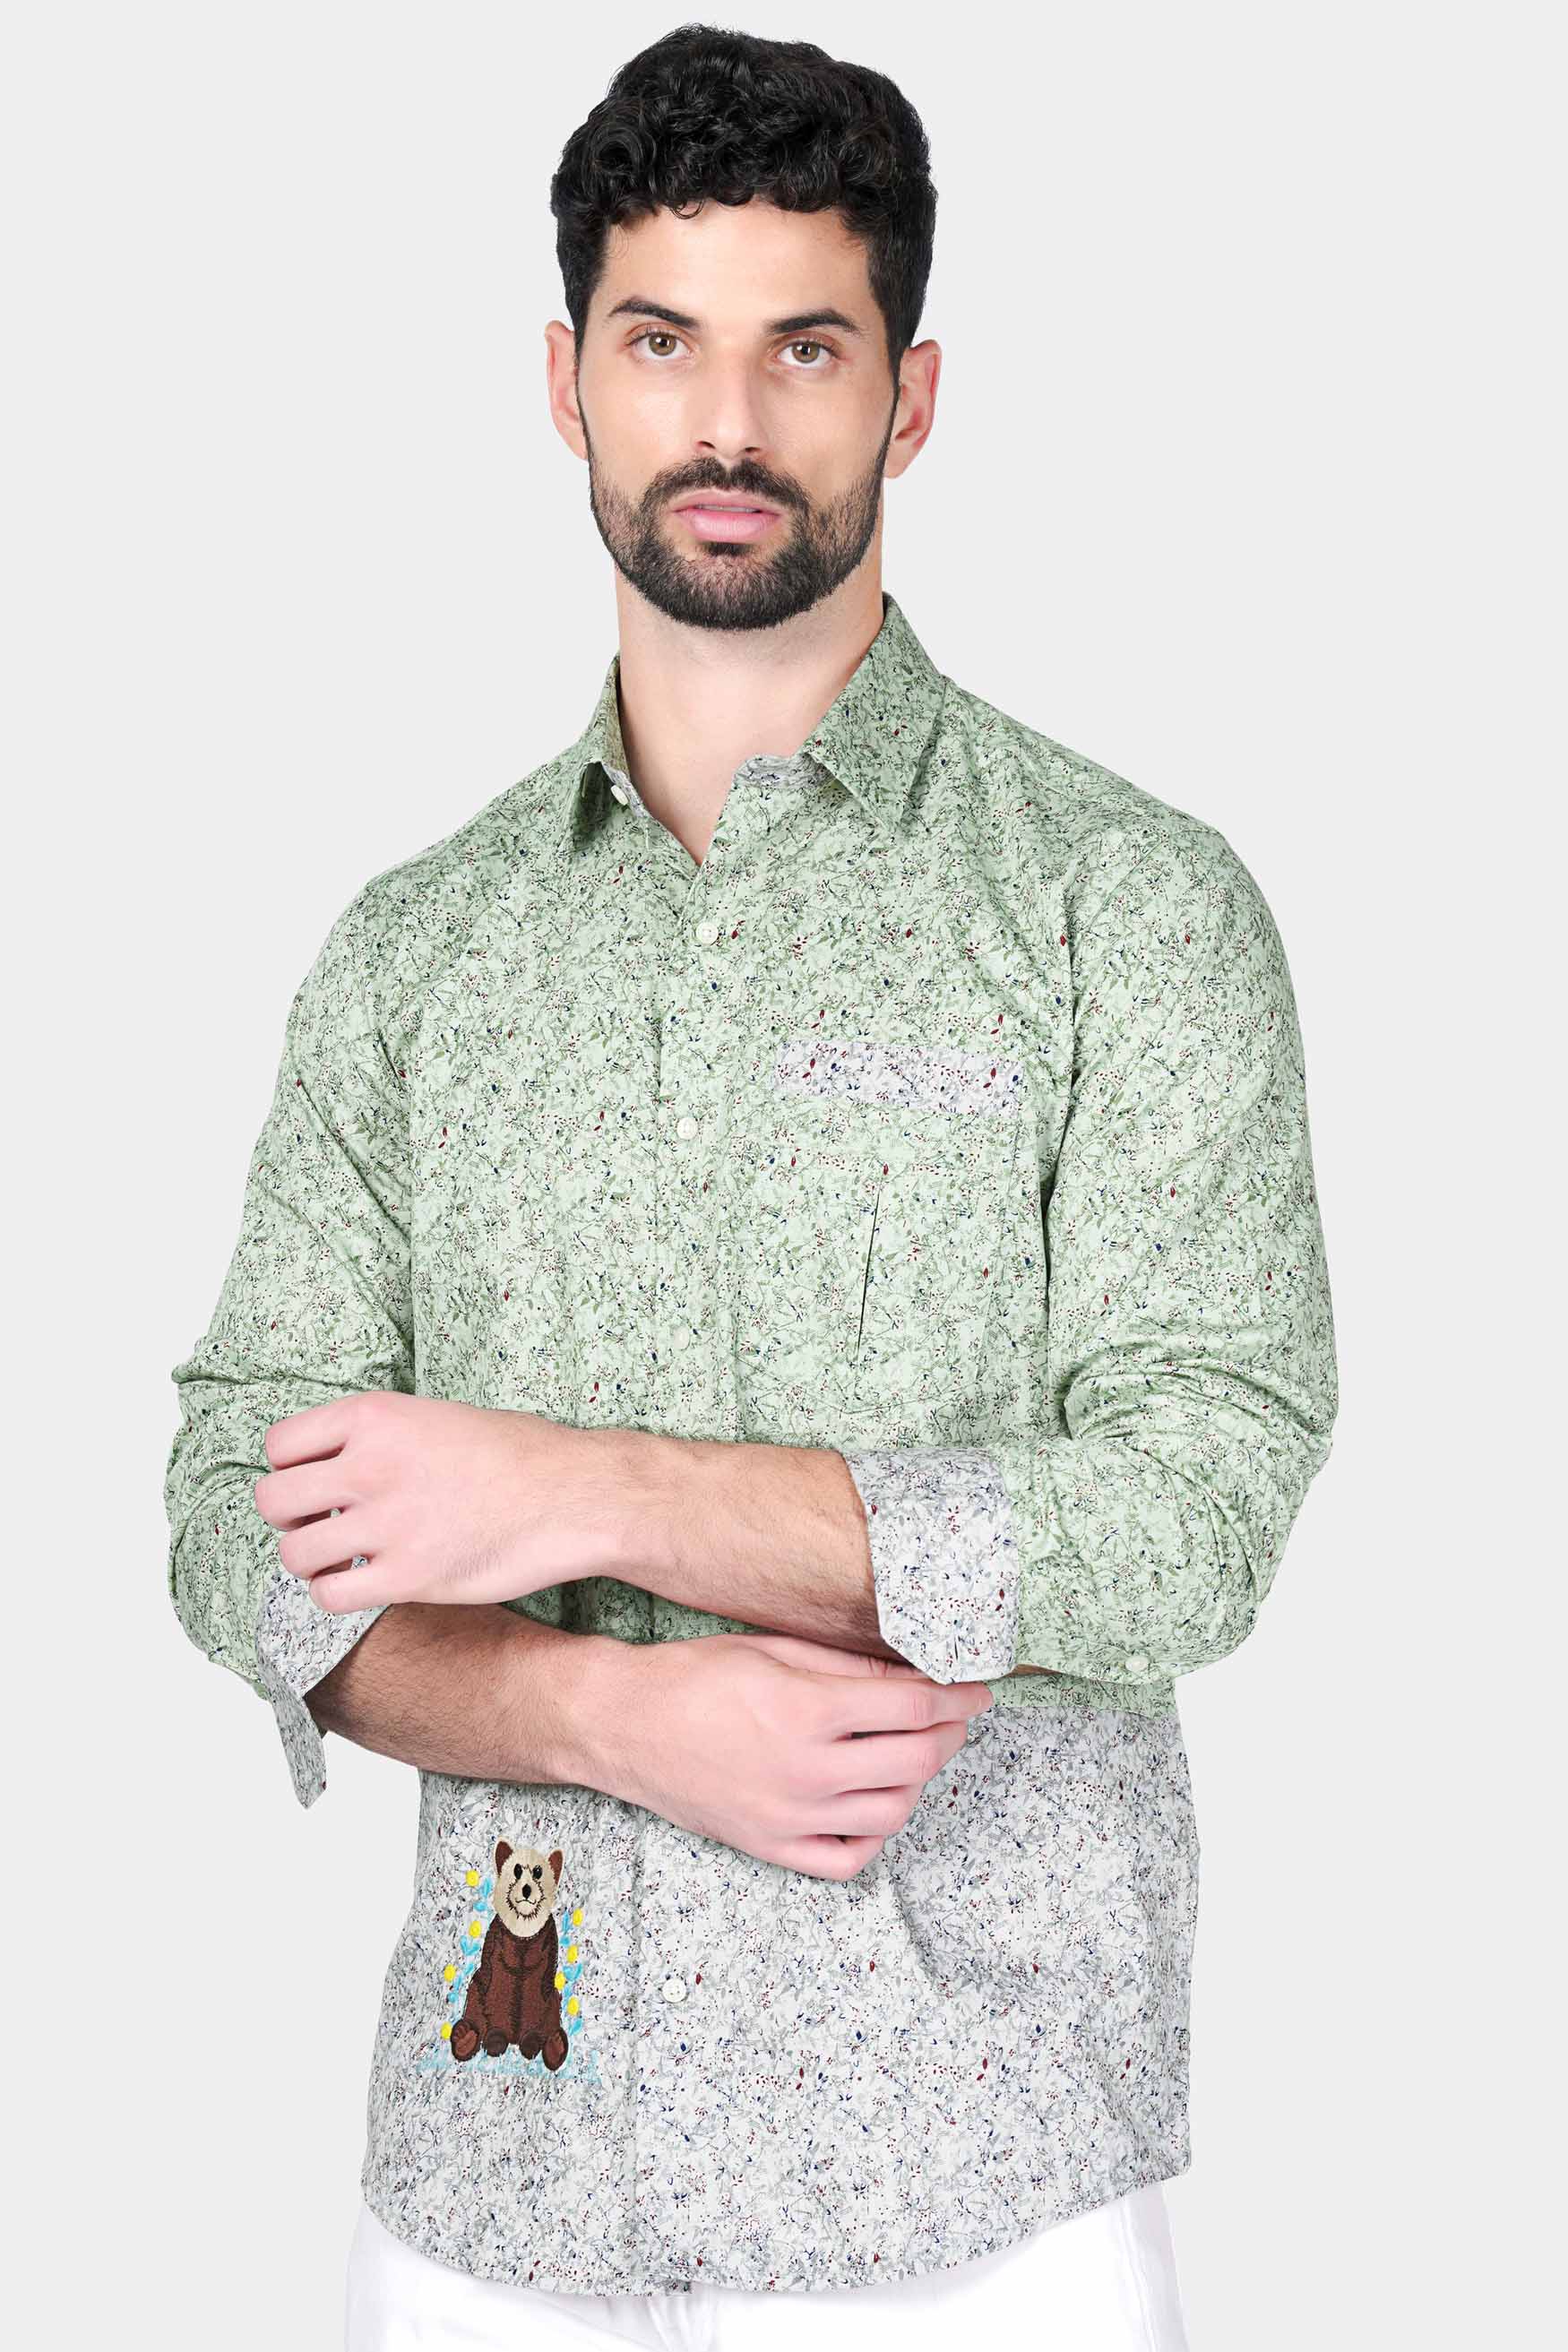 Clay Ash Green and Fiord Blue Printed with Bear Embroidered Twill Premium Cotton Designer Shirt 8193-P116-E294-38, 8193-P116-E294-H-38, 8193-P116-E294-39, 8193-P116-E294-H-39, 8193-P116-E294-40, 8193-P116-E294-H-40, 8193-P116-E294-42, 8193-P116-E294-H-42, 8193-P116-E294-44, 8193-P116-E294-H-44, 8193-P116-E294-46, 8193-P116-E294-H-46, 8193-P116-E294-48, 8193-P116-E294-H-48, 8193-P116-E294-50, 8193-P116-E294-H-50, 8193-P116-E294-52, 8193-P116-E294-H-52